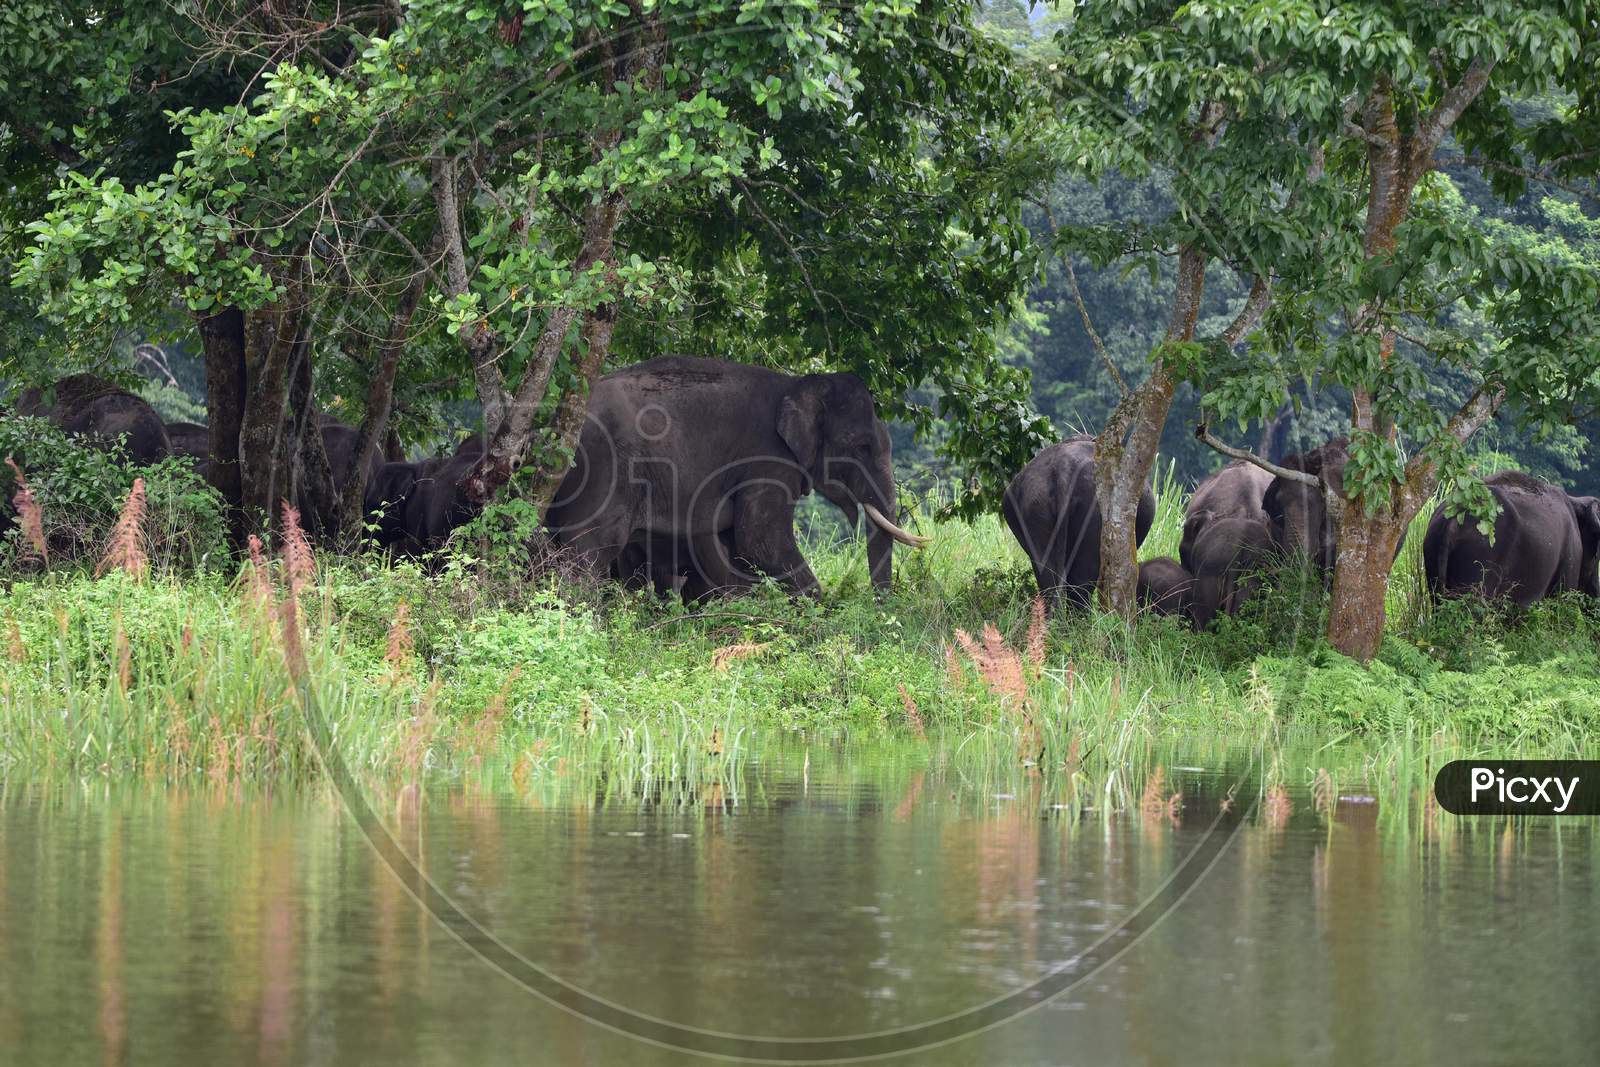 A Herd Of Elephant Take Shelter At A Highland In The Flood Affected Area Of Kaziranga National Park In Nagaon District In The Northeastern State Of Assam on June 28,2020.